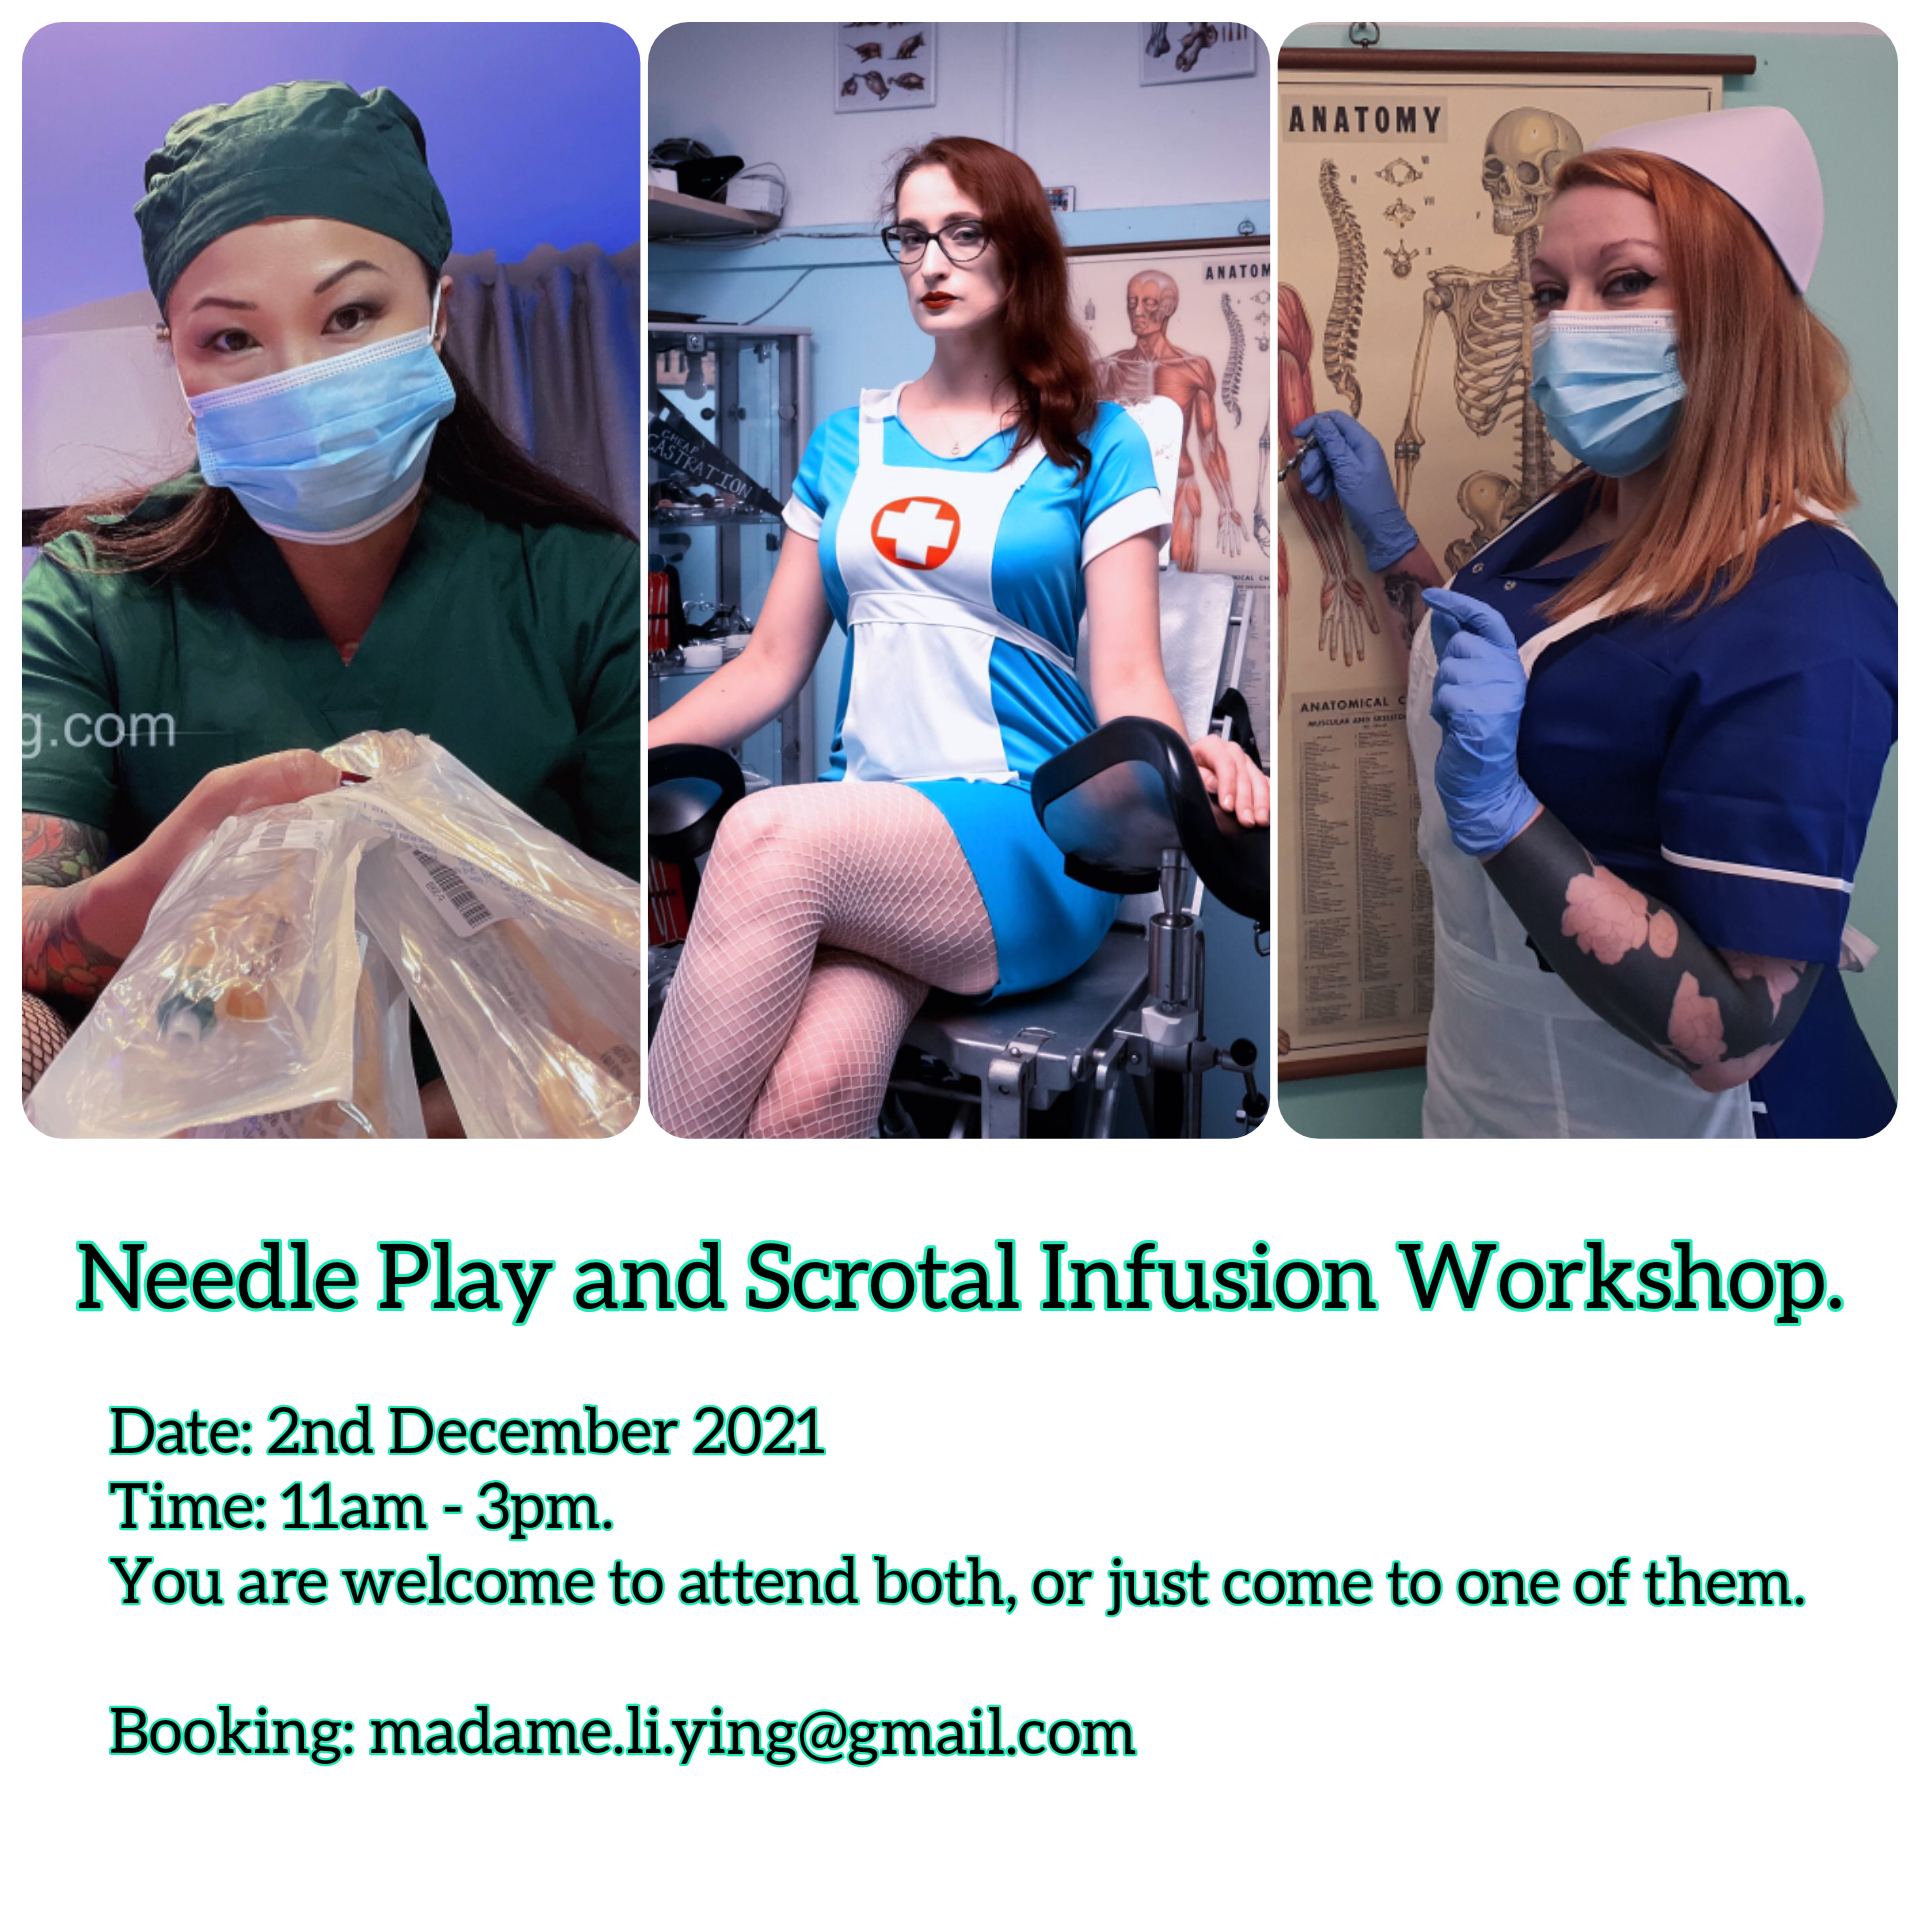 Needle Play and Scrotal Infusion Workshop.